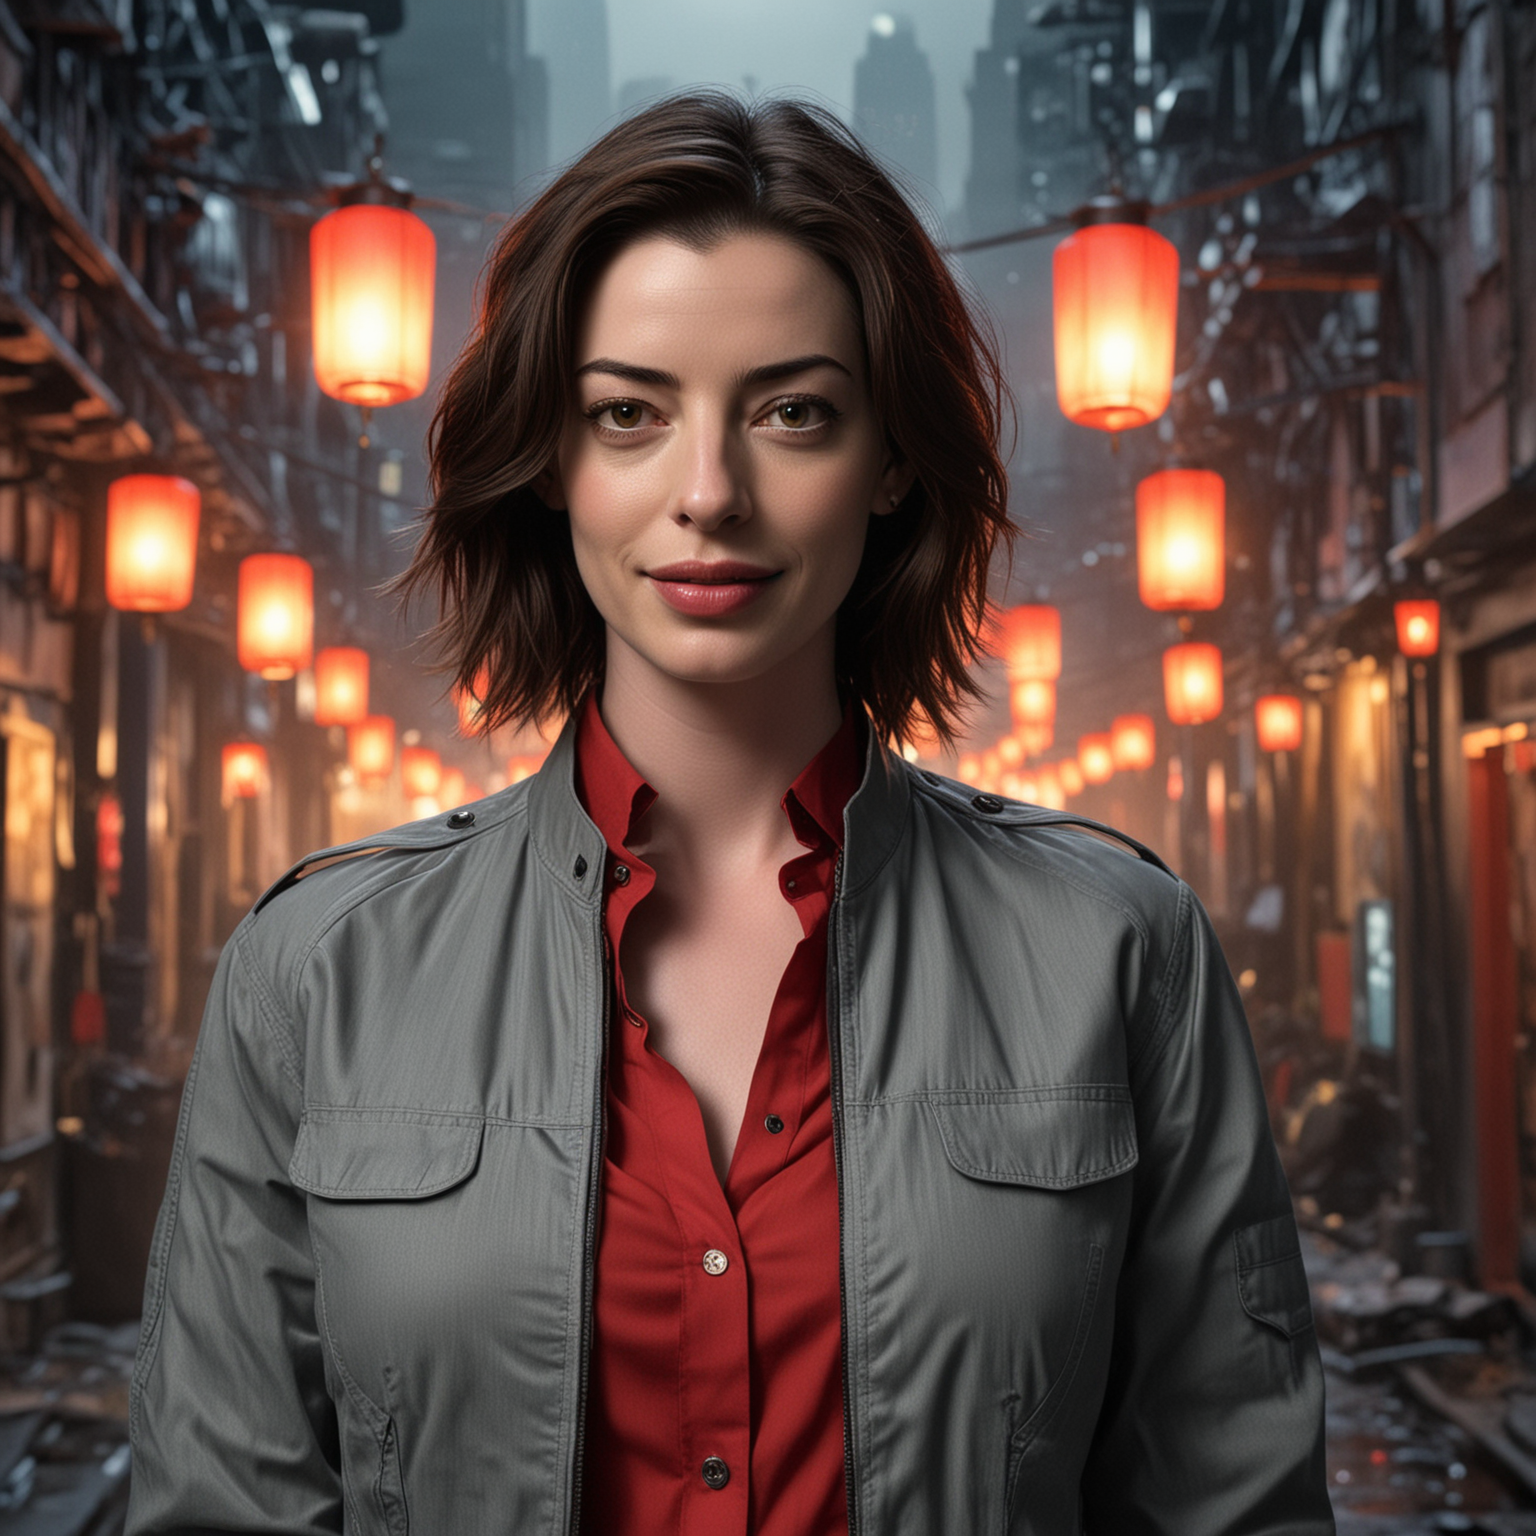 anne hathaway wearing red collarless shirt and a grey jacket surrounded by cyberpunk lanterns